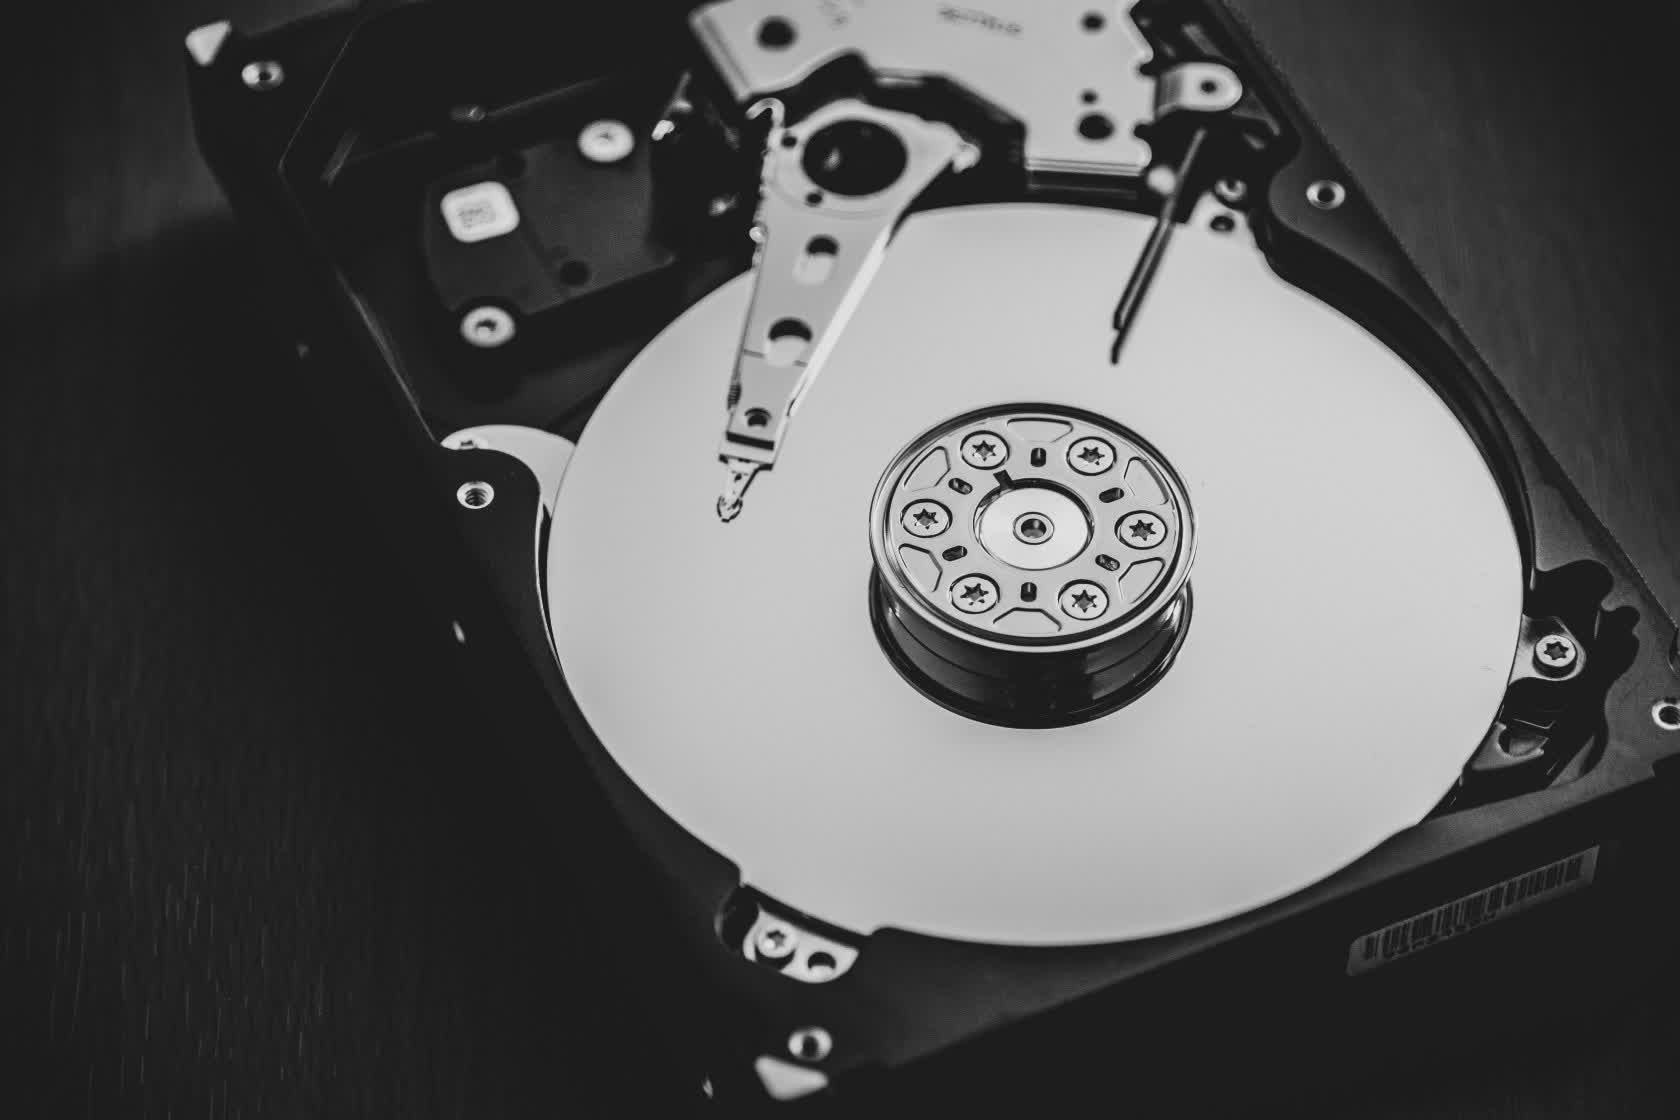 Recent report claims Seagate and Hitachi HDDs are most likely to fail - tech news india - Technology - Public News Time